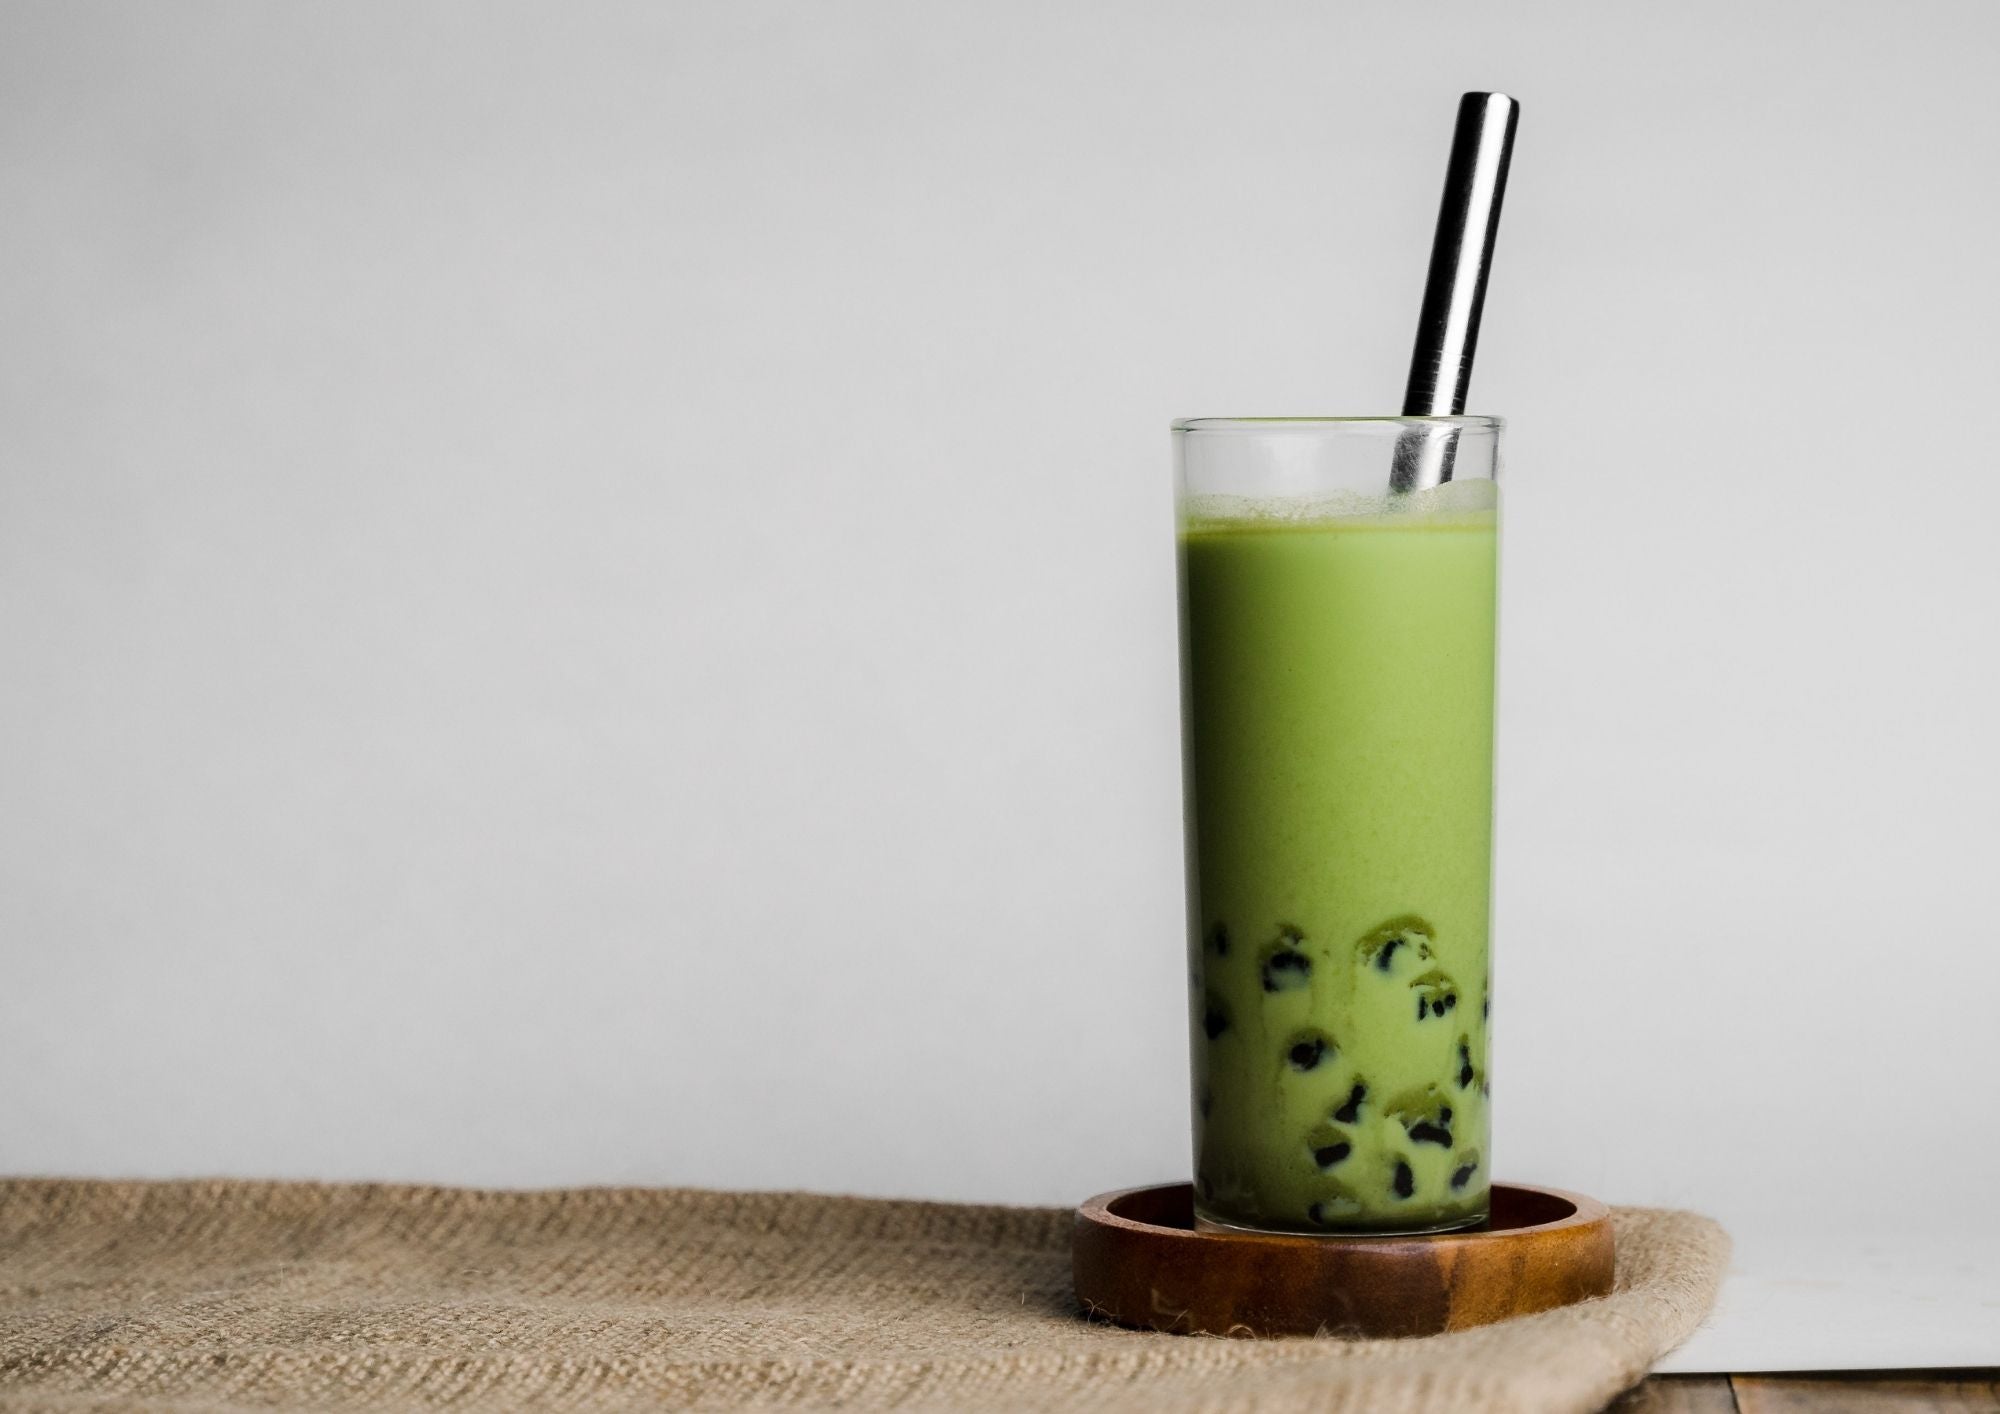 Top Matcha Tea Manufacturer and Supplier in the United States